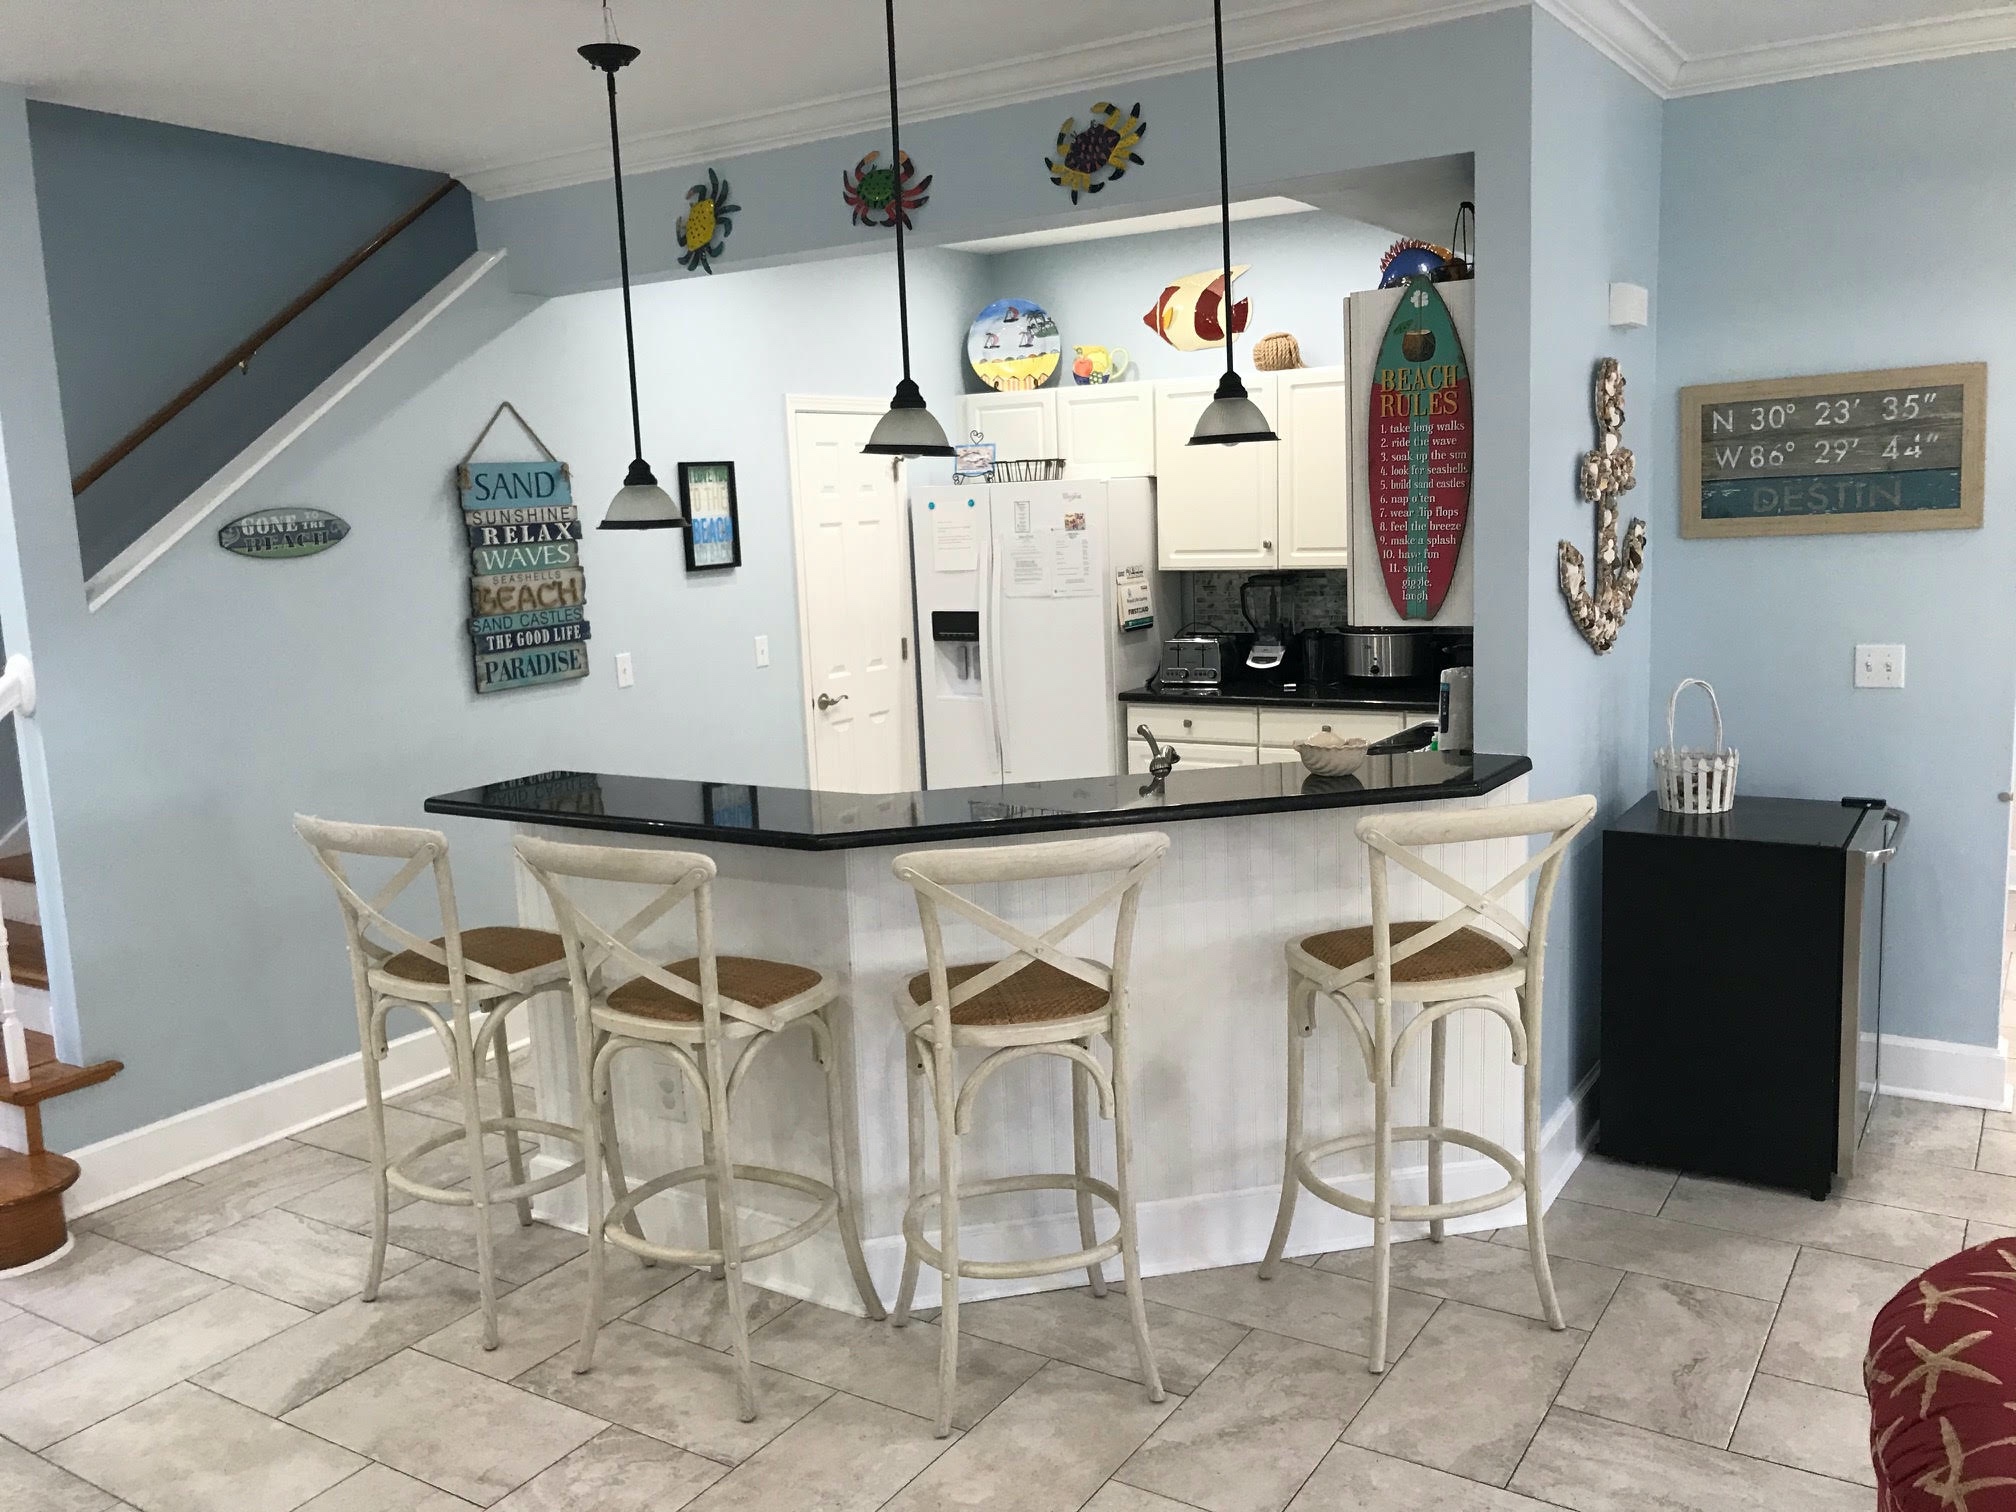 Granite Bar area with 4 stools